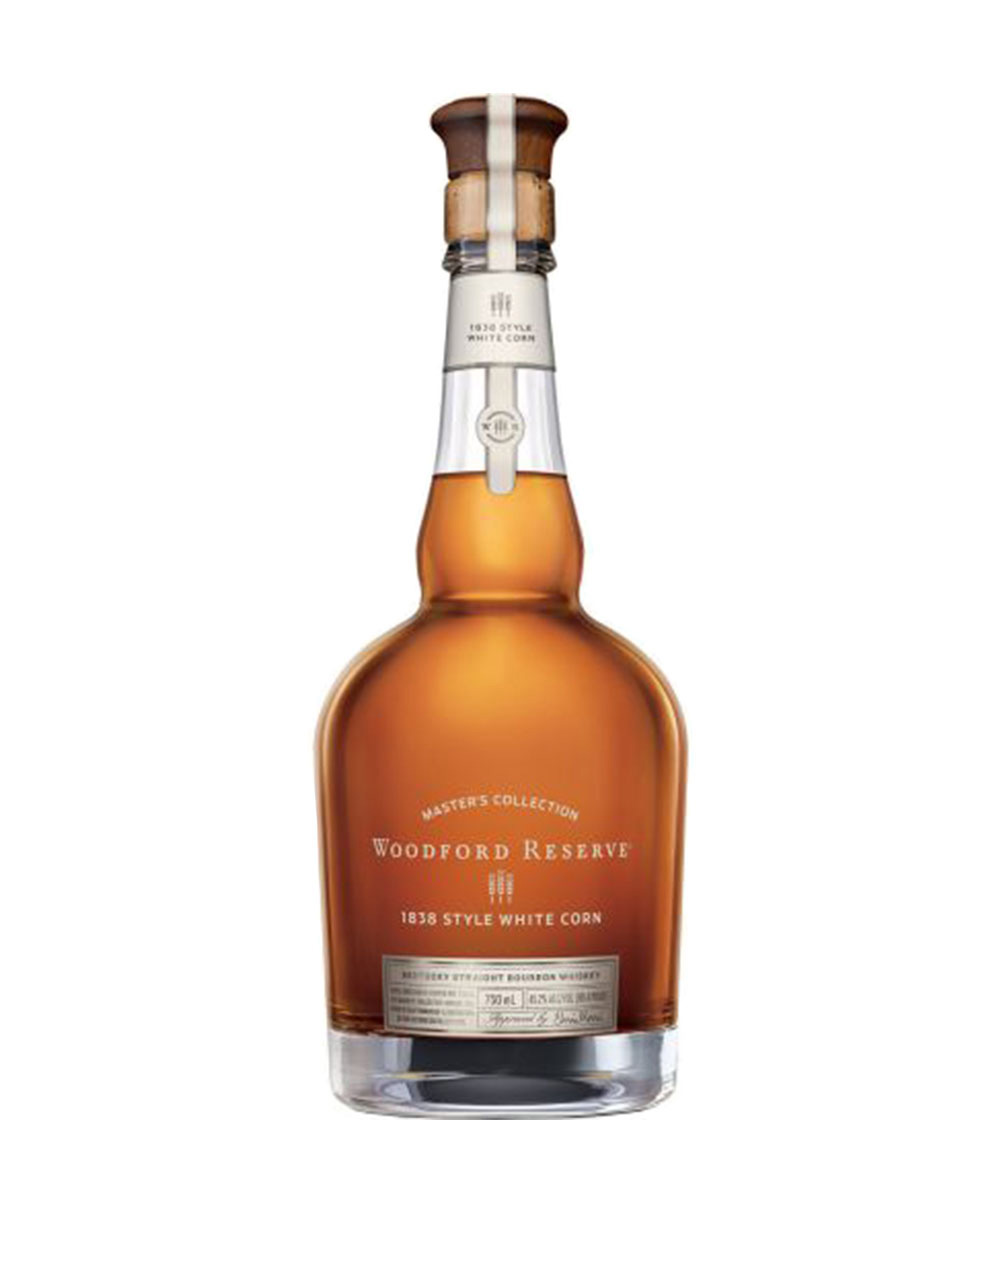 Woodford Reserve Master's Collection 1838 Style White Corn Straight Bourbon Whiskey